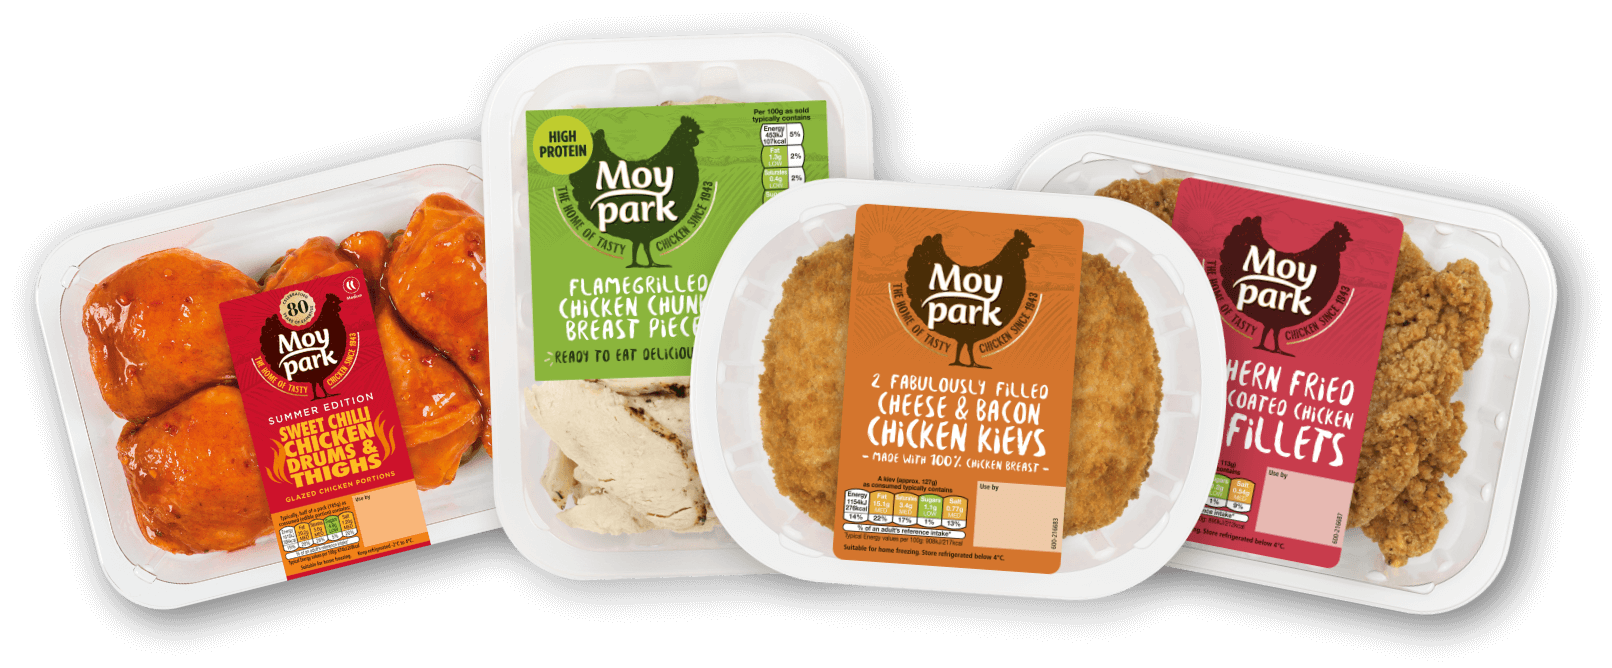 Moy Park Chicken - Products